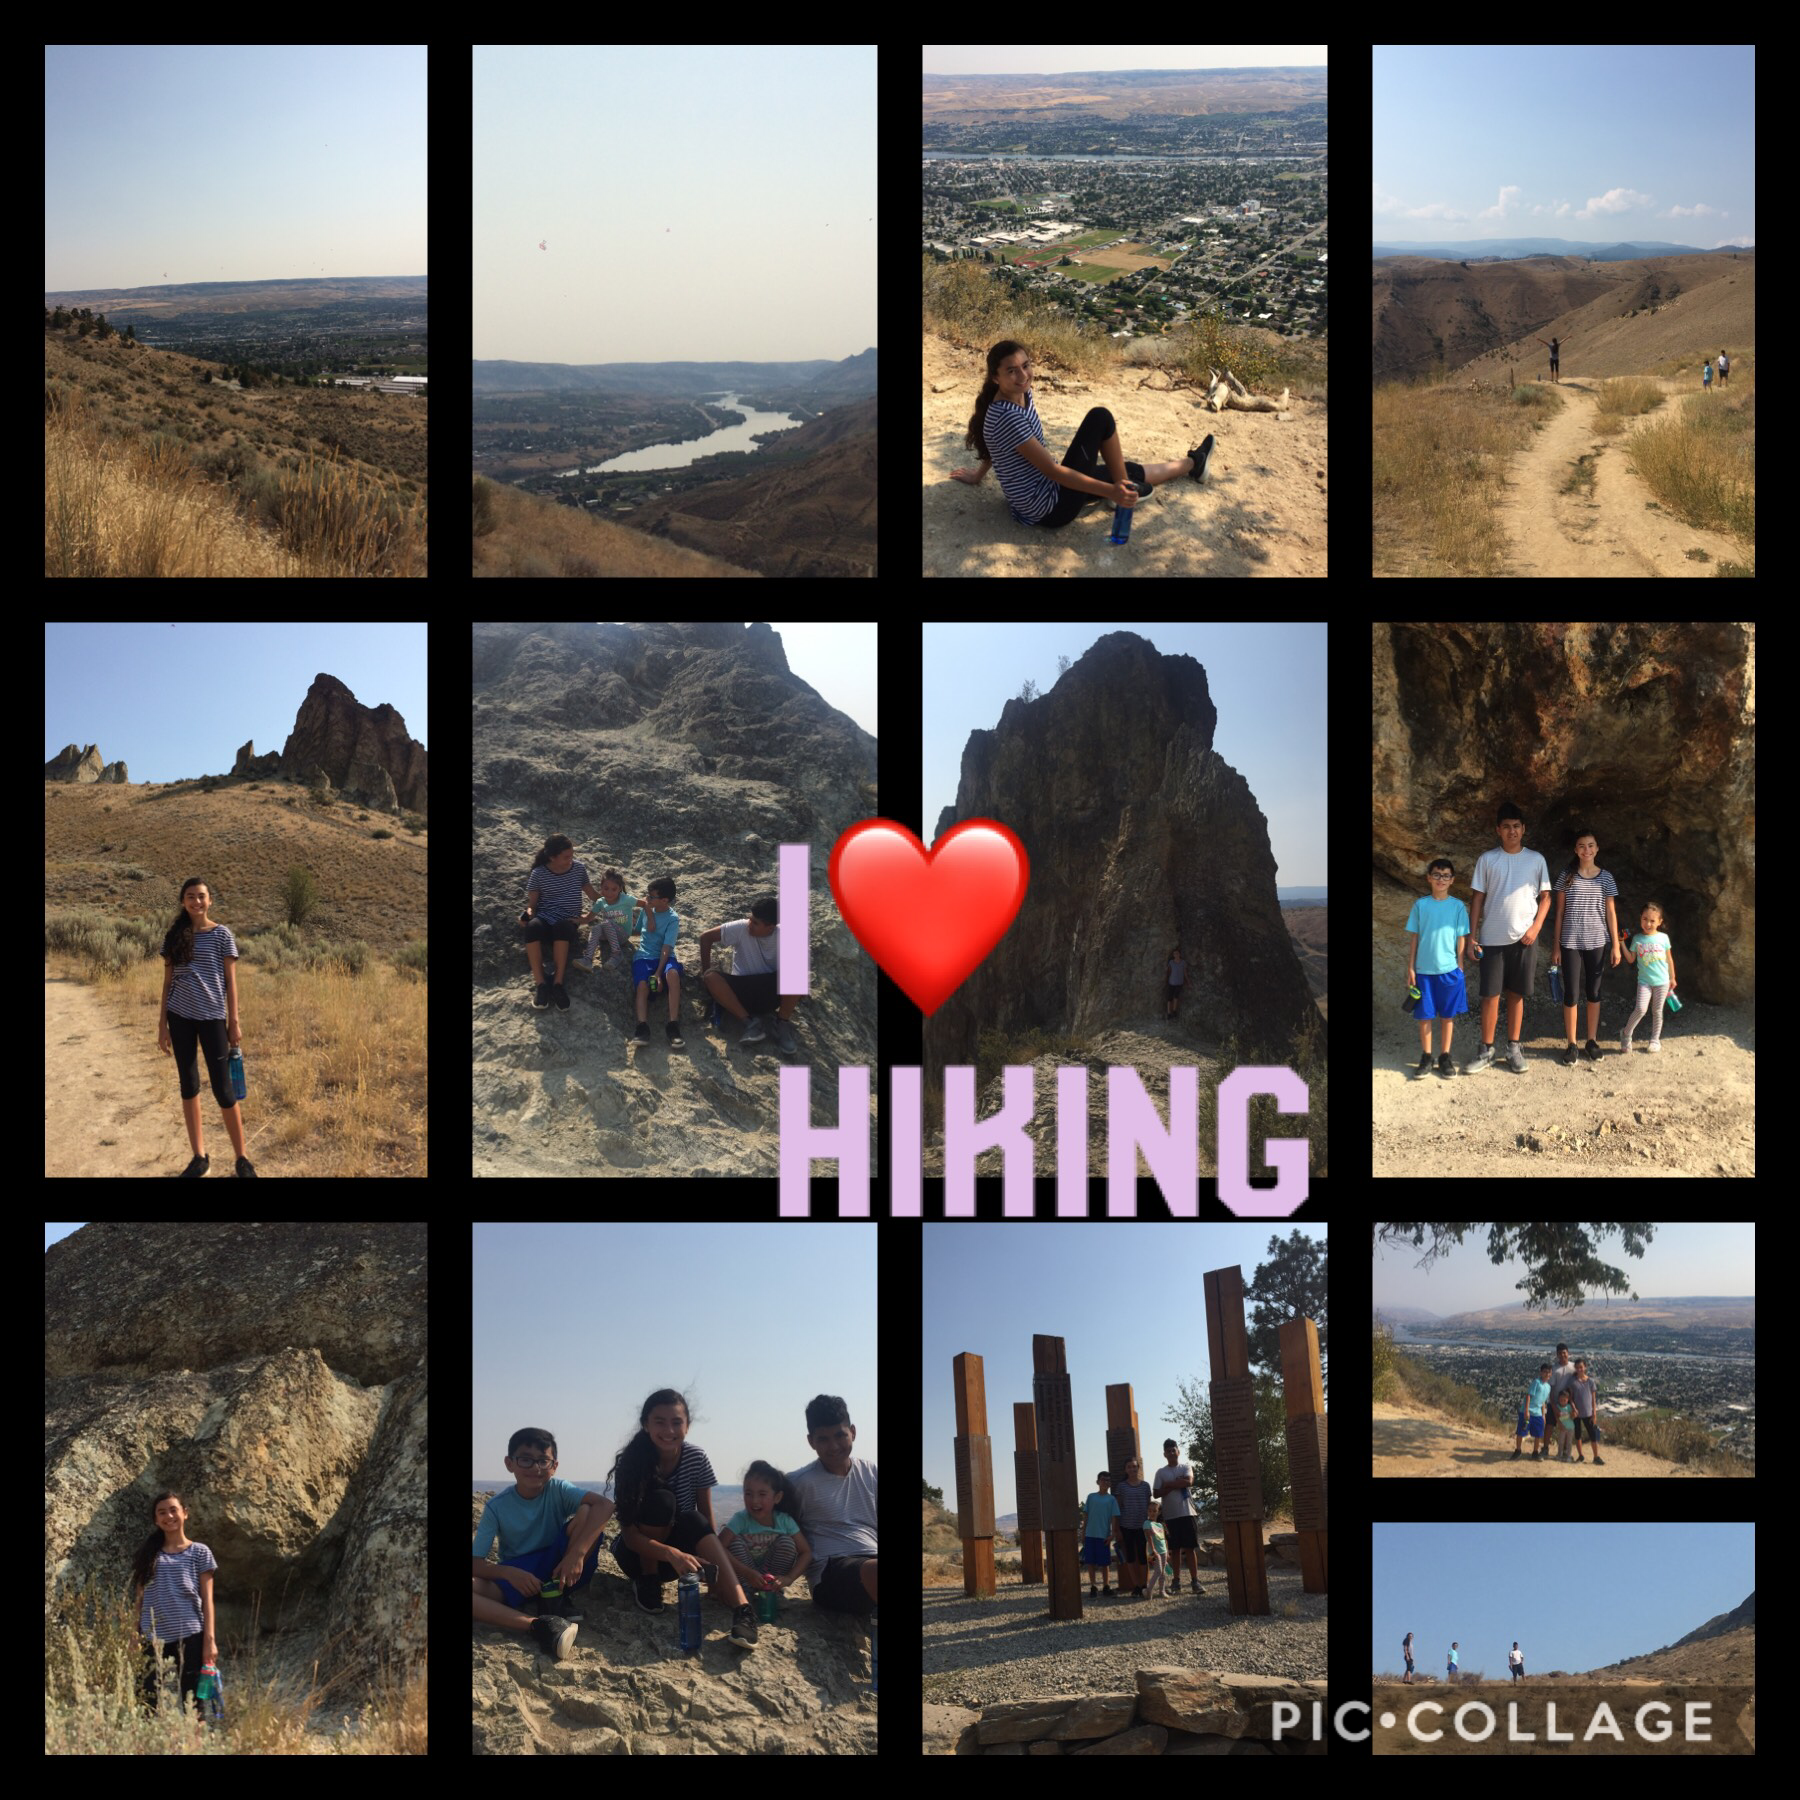 I love hiking and let me tell u that took a while to get to the top but it felt good and made my legs stronger lol but hiking is fun! 